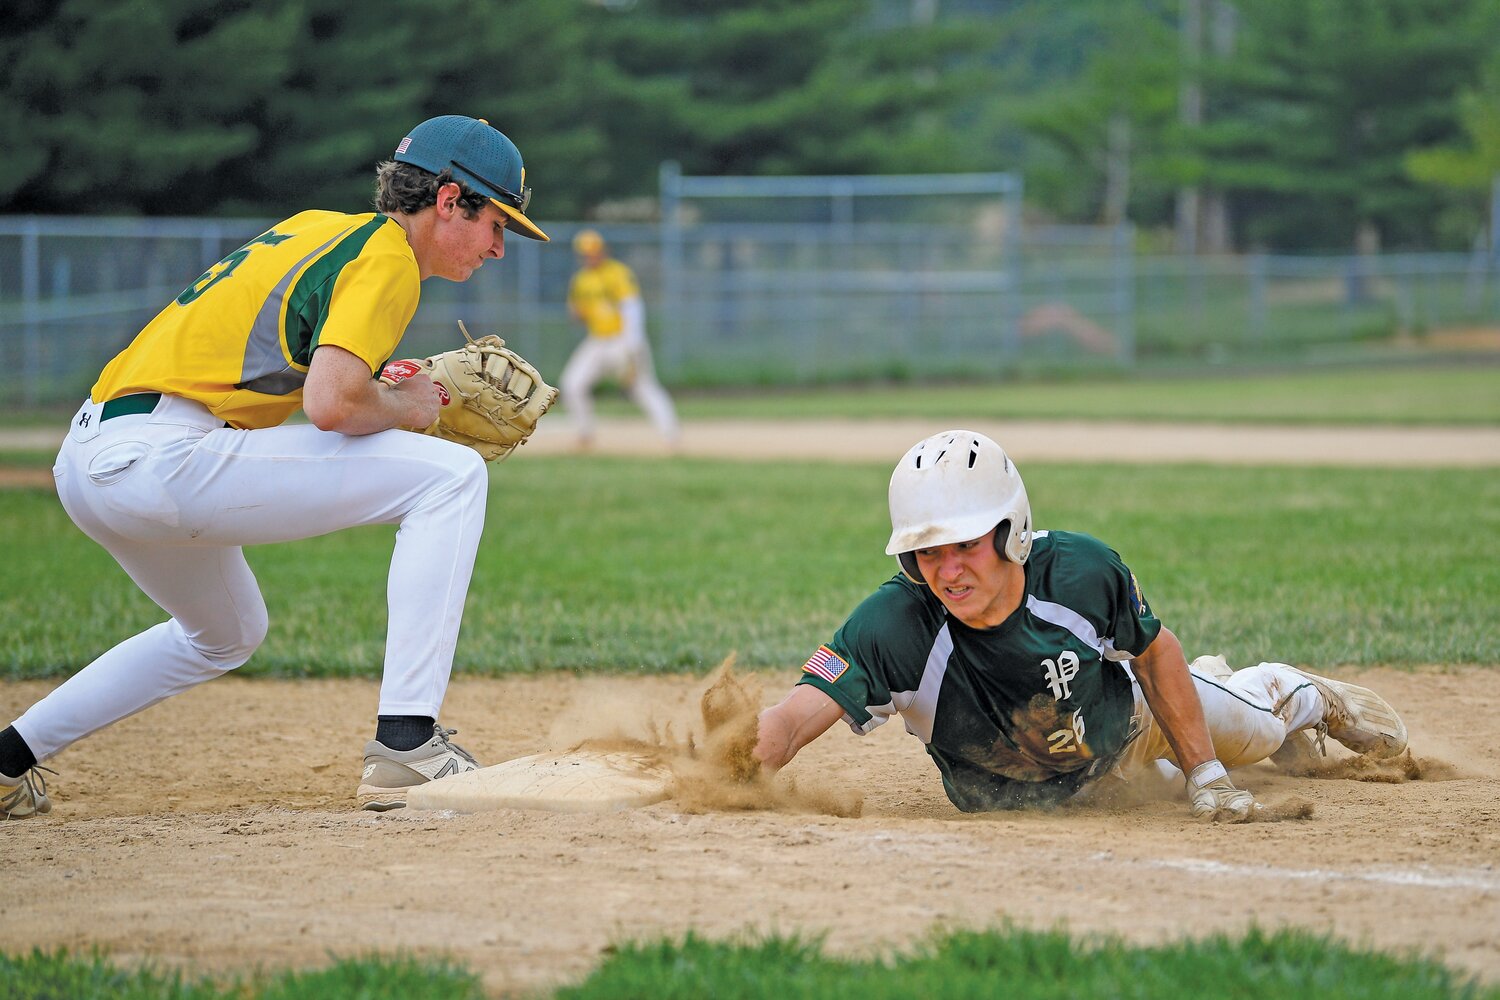 Pennridge’s Will Slamm dives back to first during a second inning pickoff attempt in Game 1 against Nor-Gwyn.